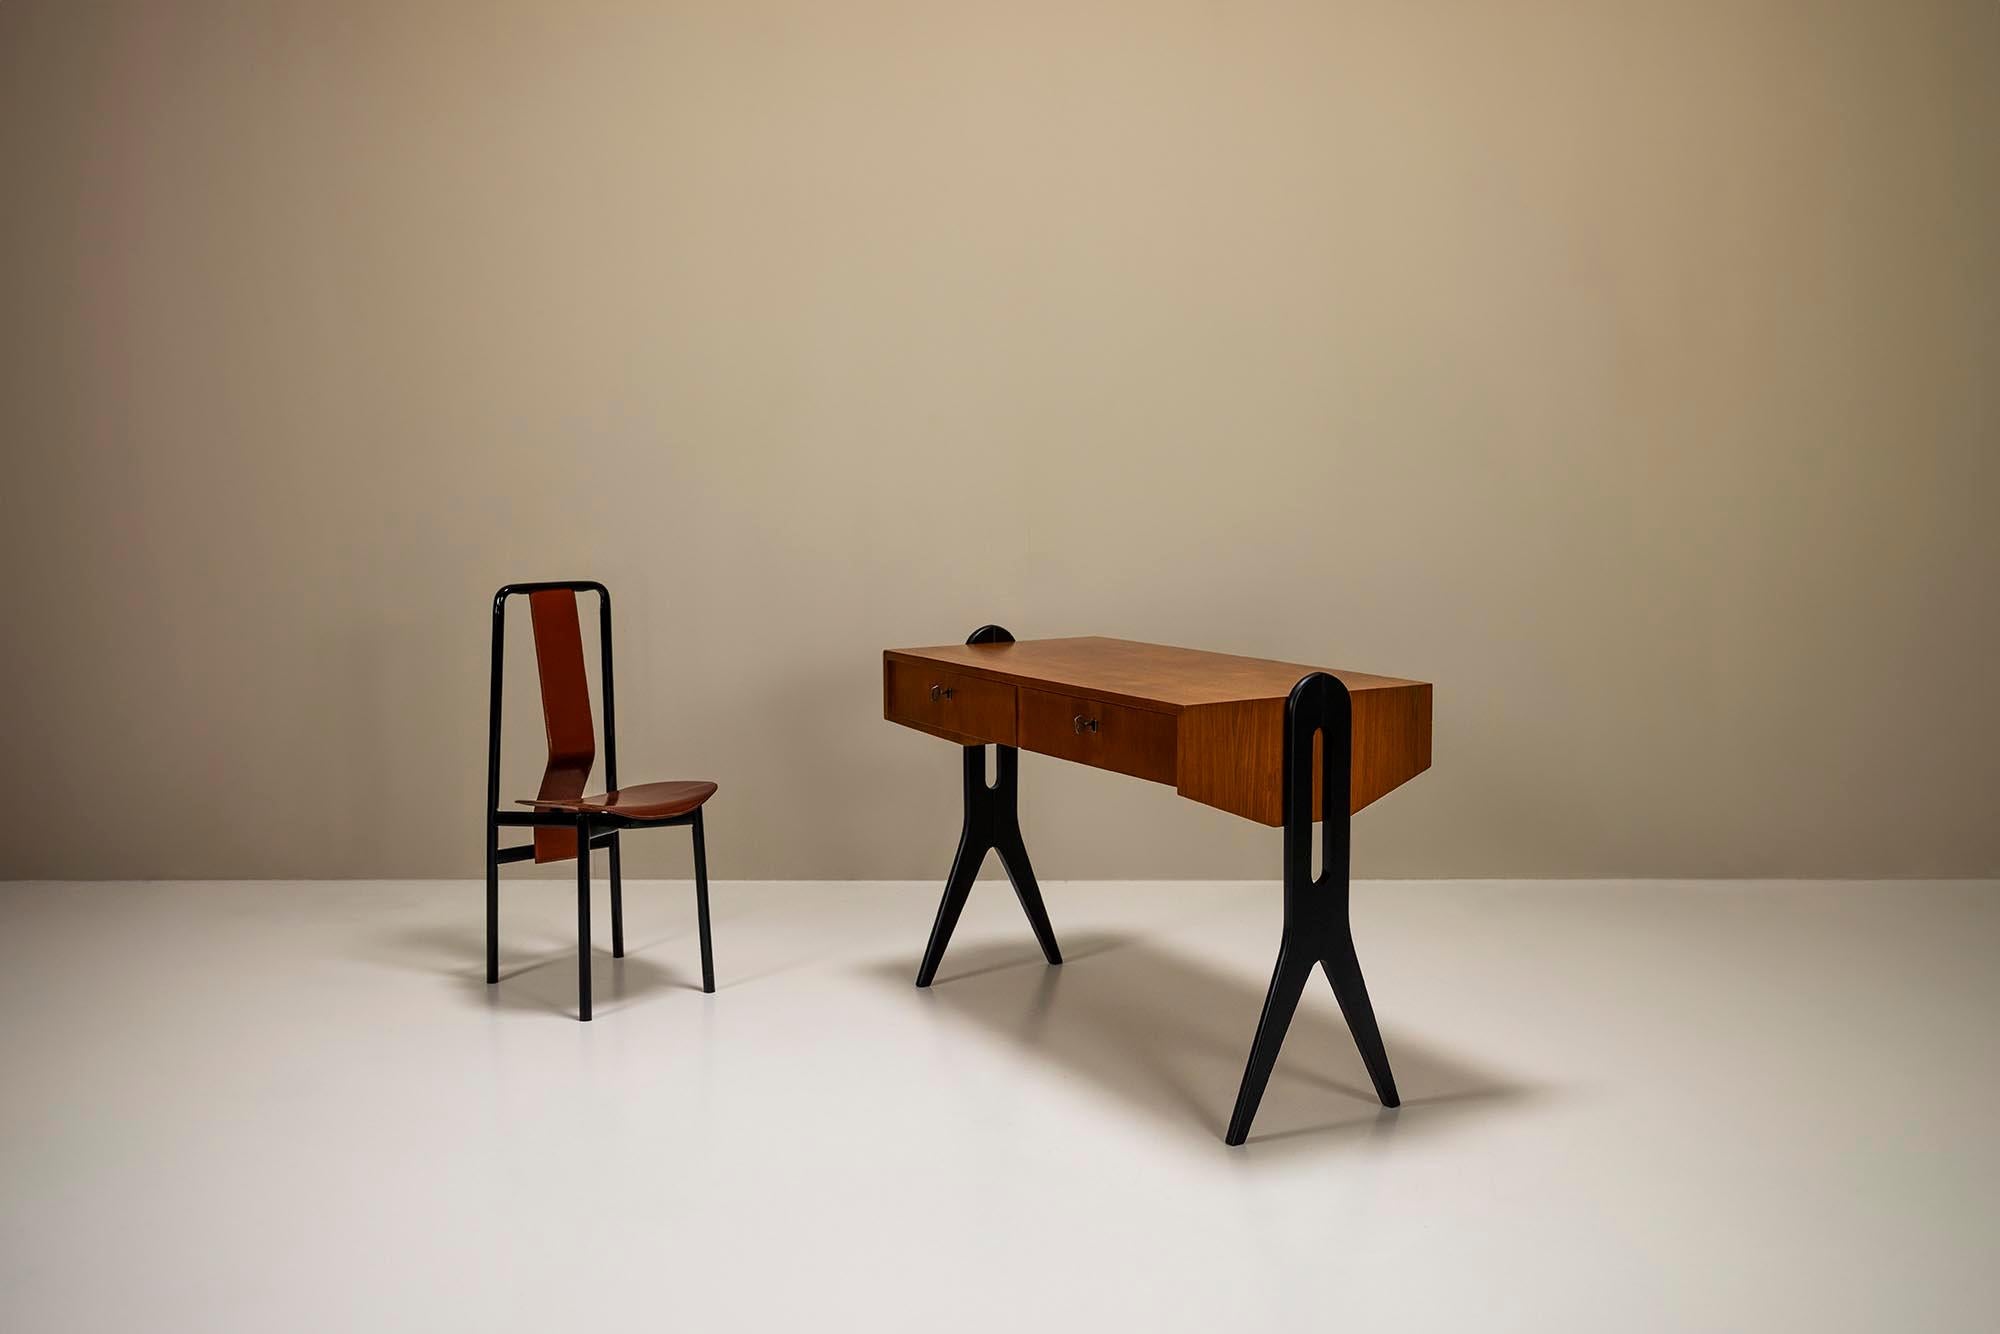 What immediately stands out about this desk are the black scissor-shaped legs that contrast sharply with the peculiar body part. We often see these heavily stylized legs in Italian design from the 1950s. For example, at the end of that era and the